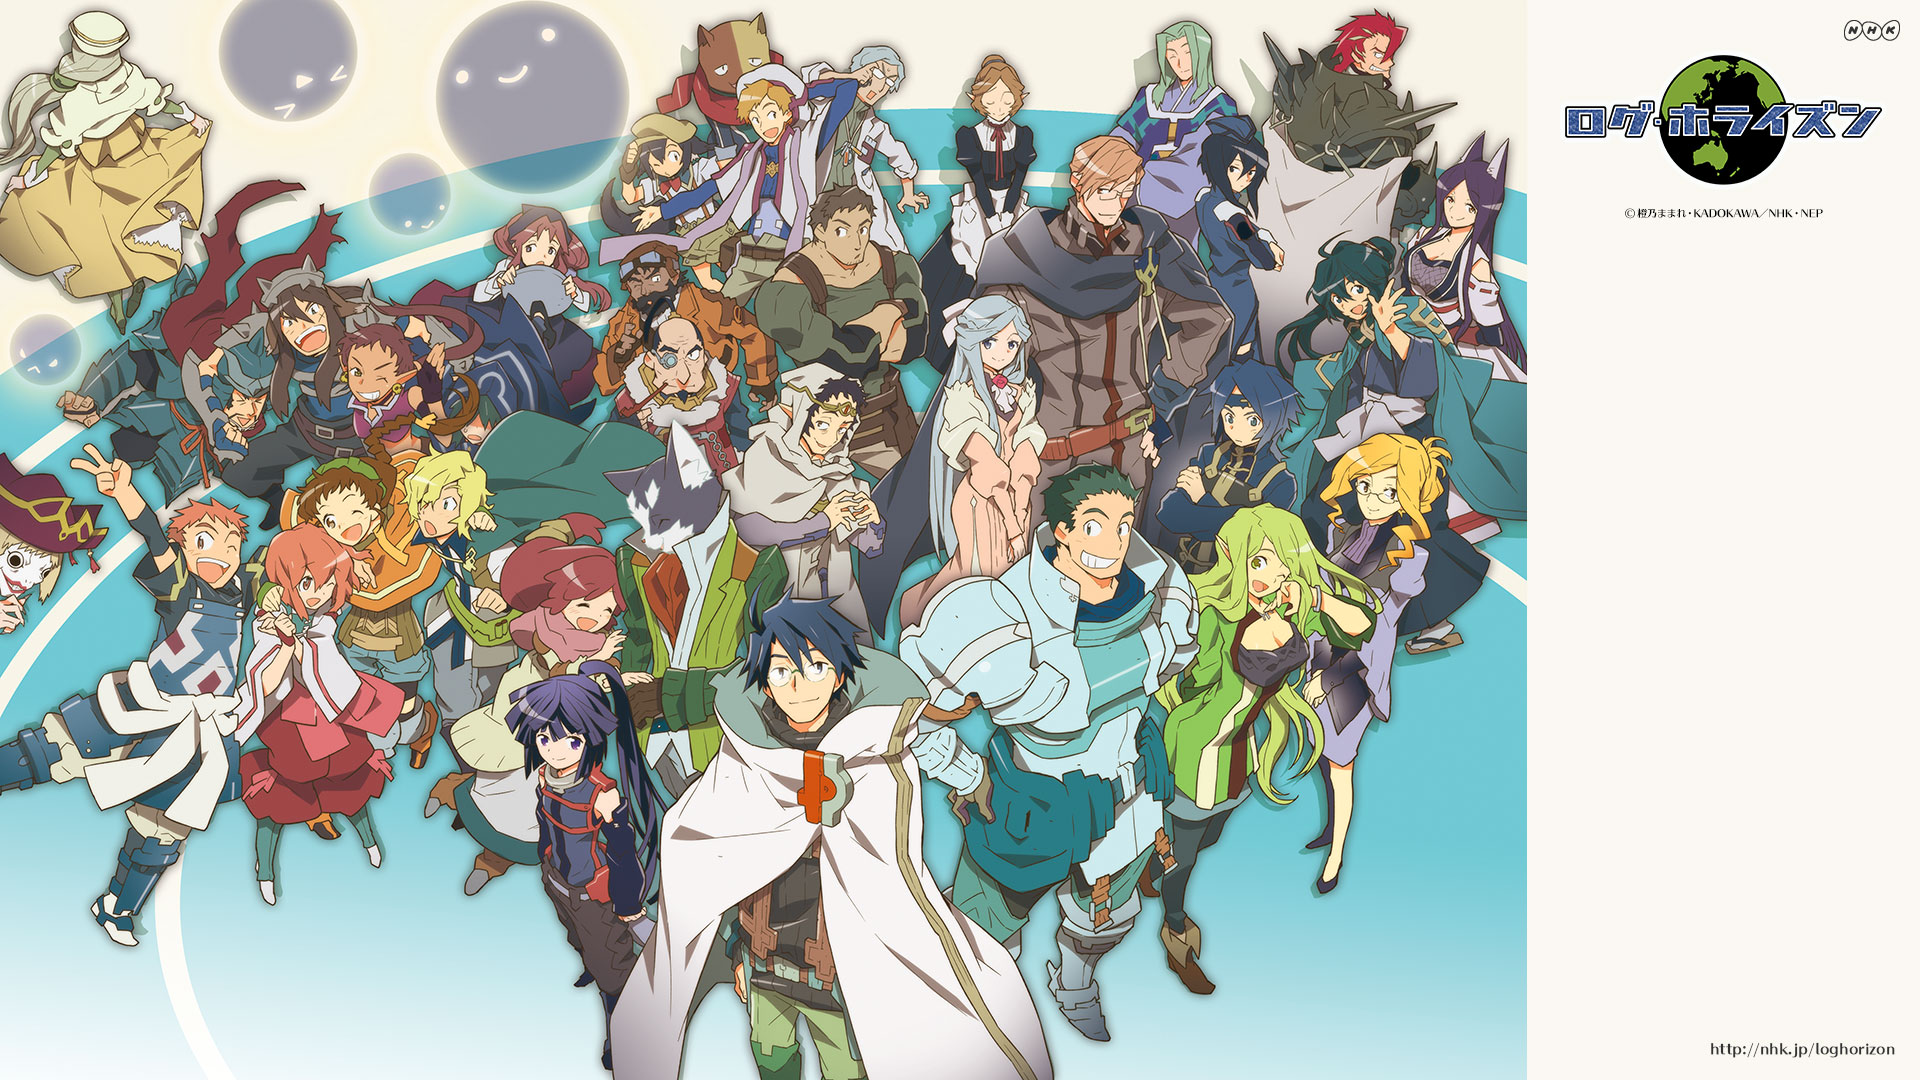 The Creators Of Log Horizon Anime Series Have Shared With Fans A